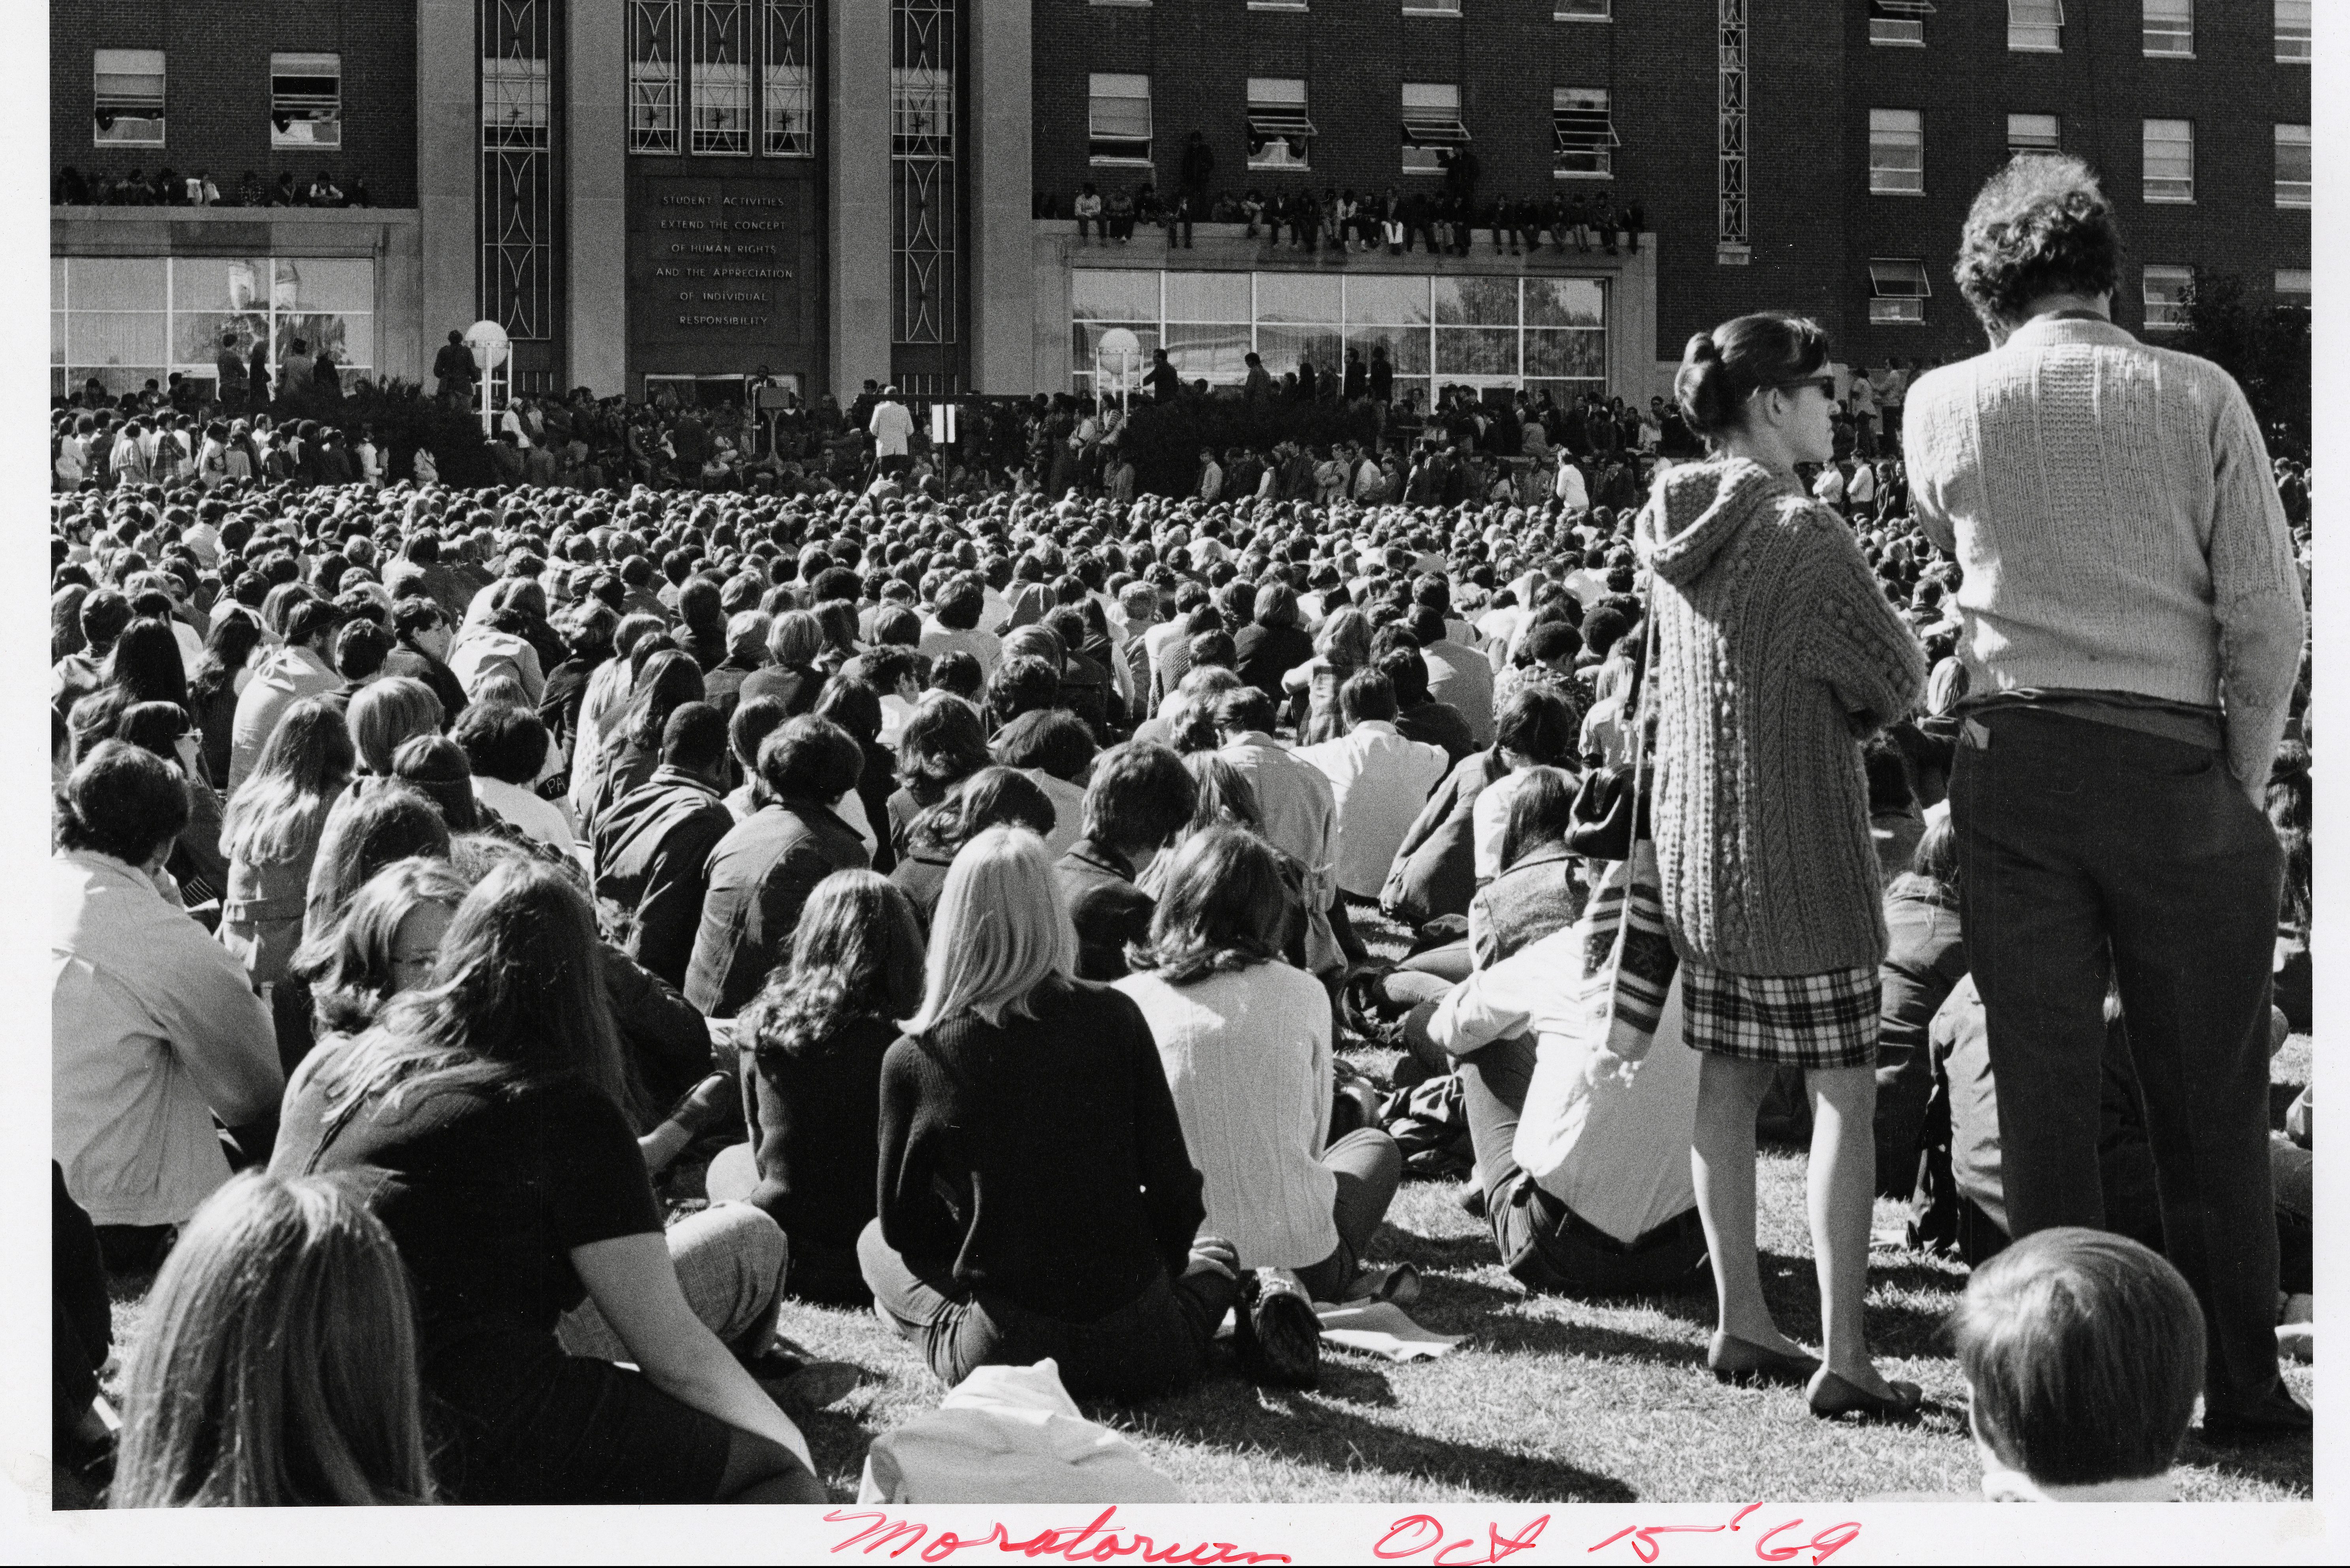 Black and white photo showing a crowd of people listening to speakers in front of the UConn Student Union in 1969